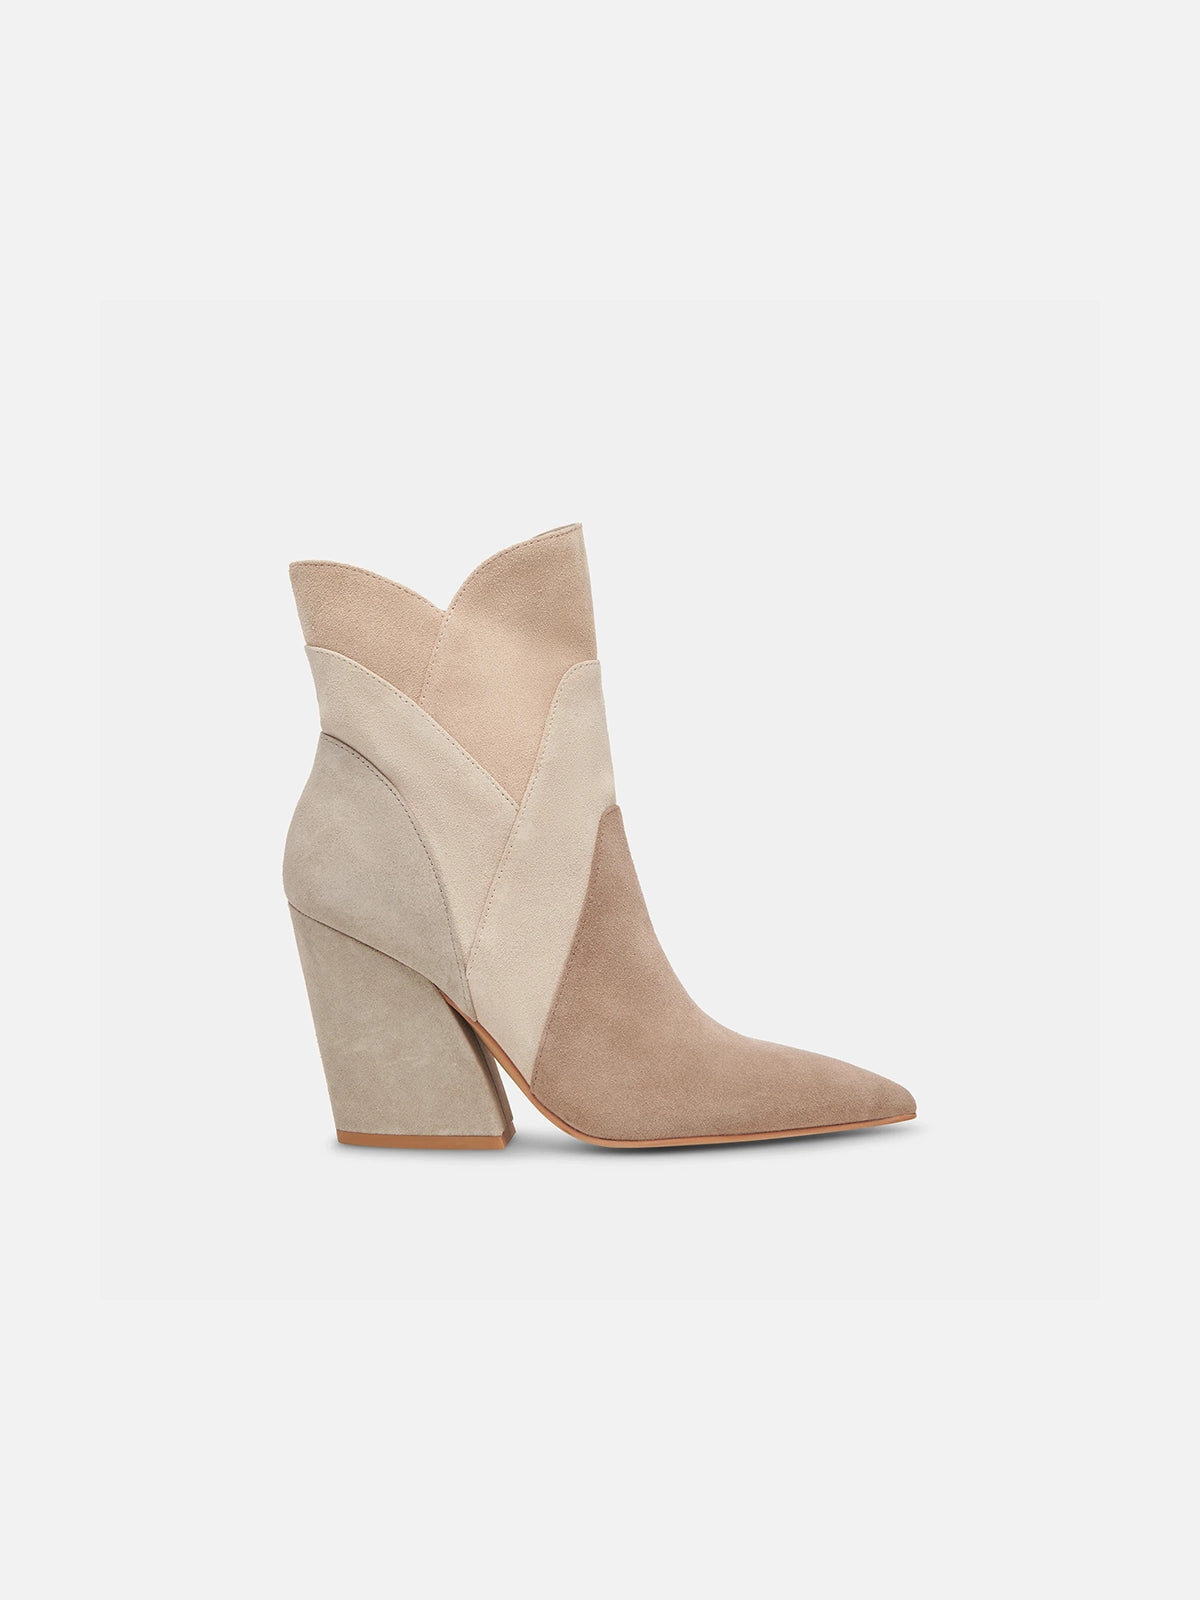 dolce vita neena booties in taupe multi suede